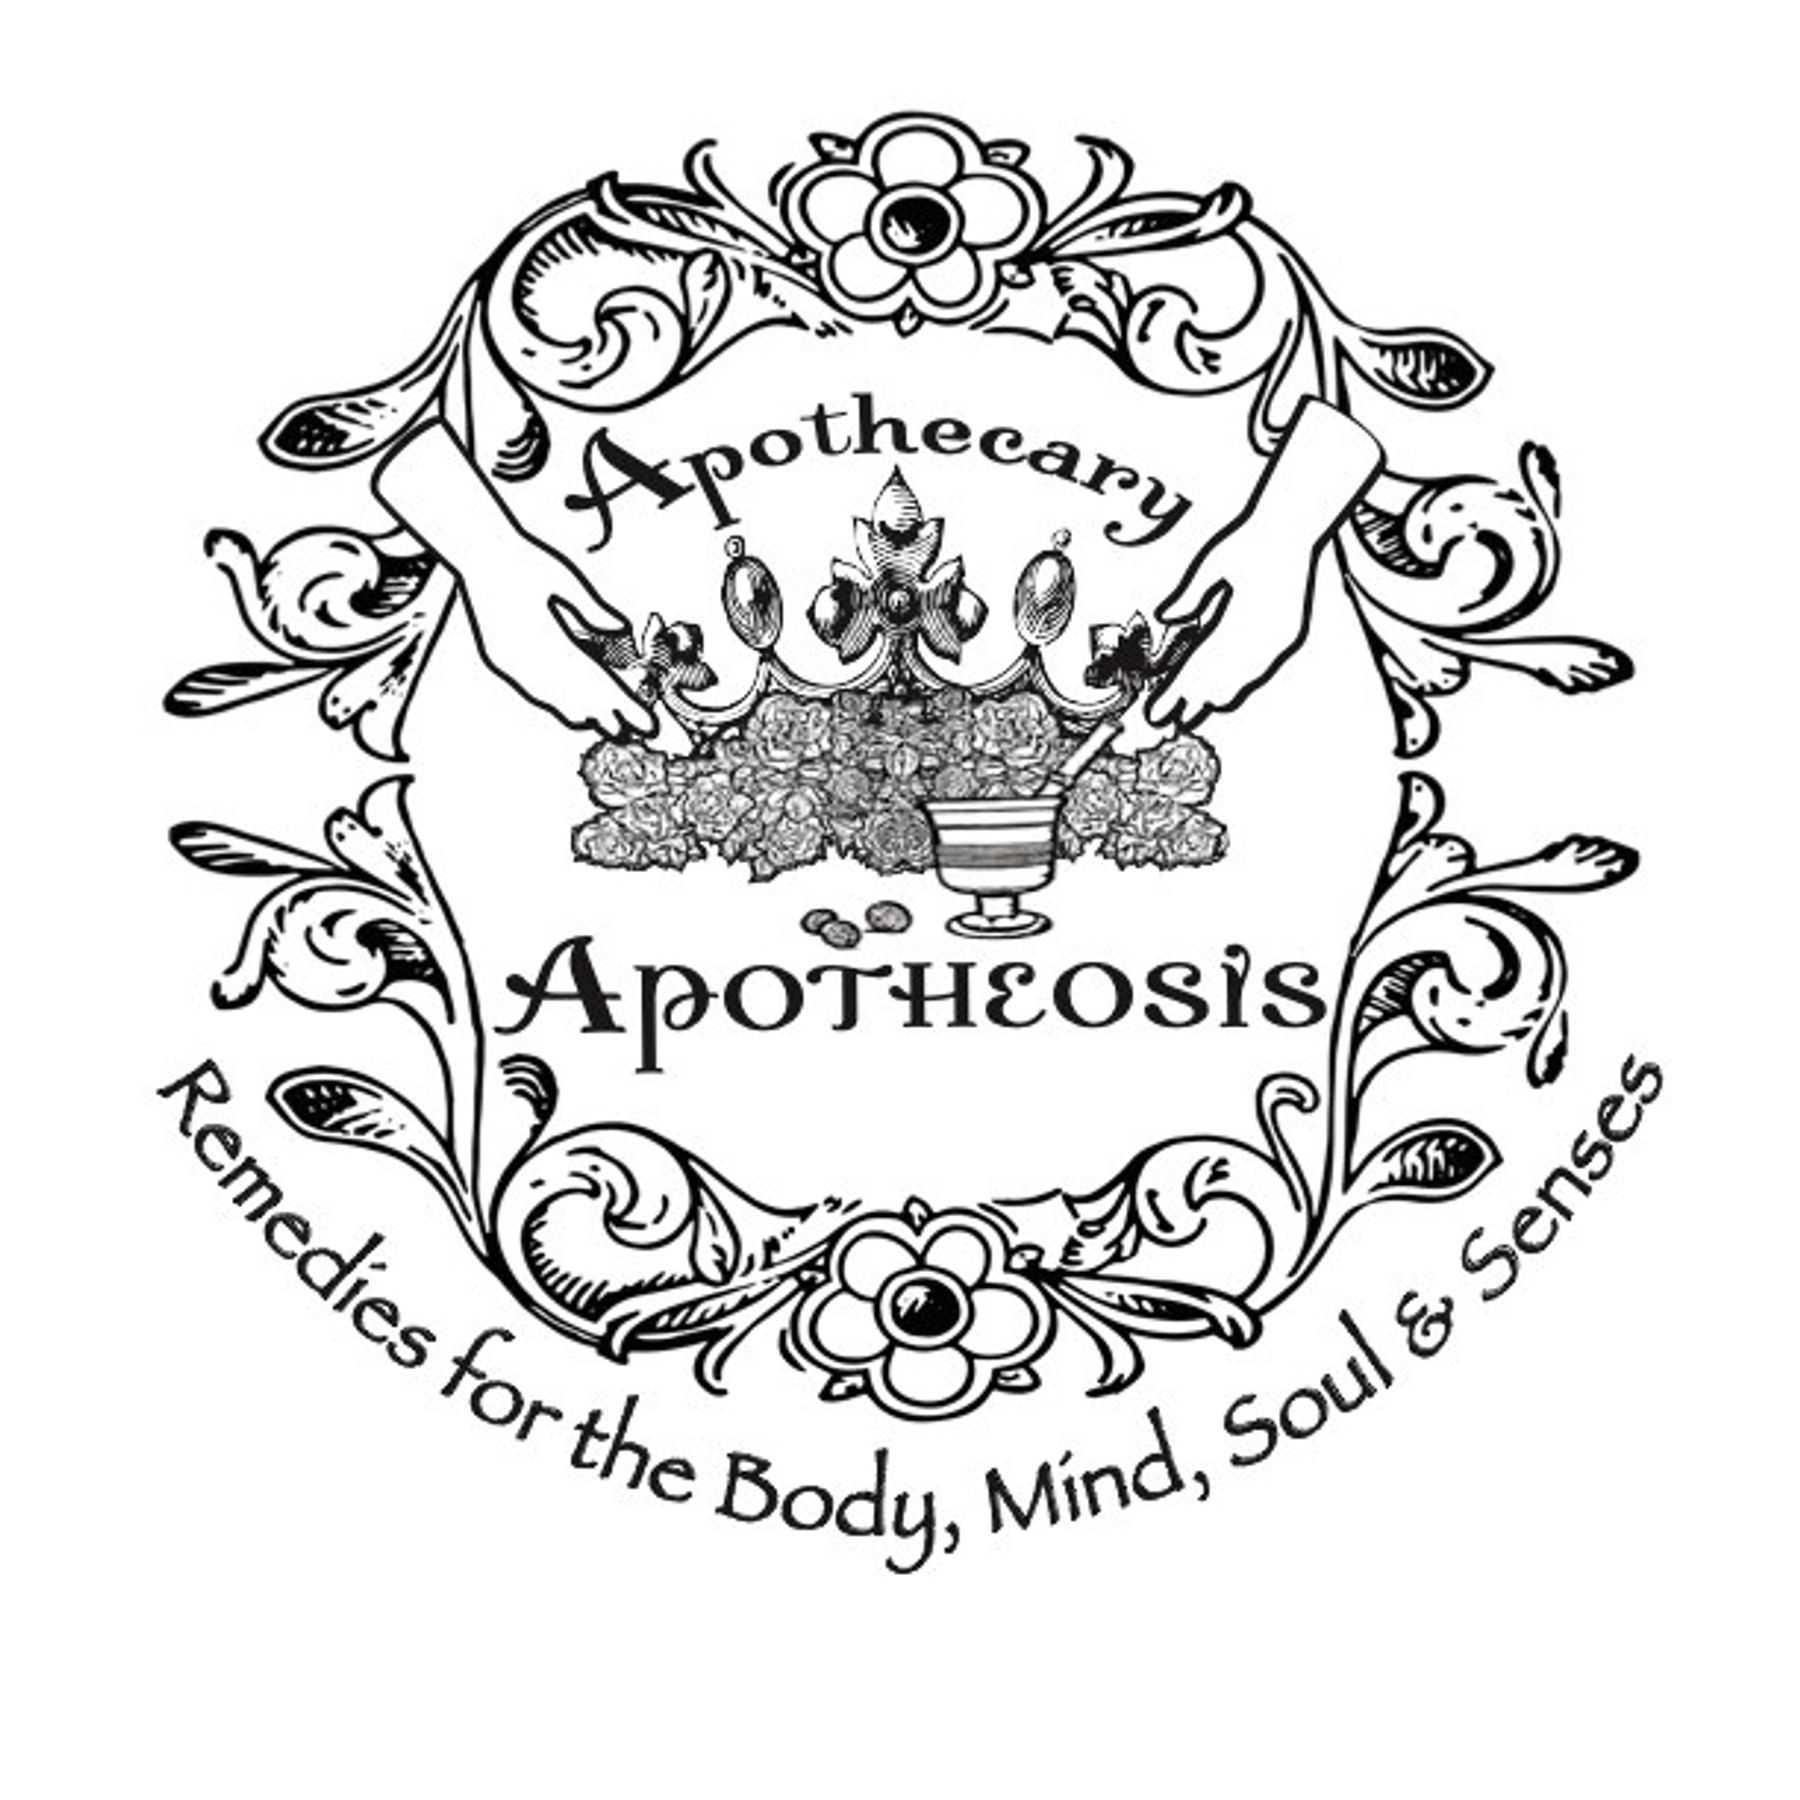 apothecary - Wiktionary, the free dictionary